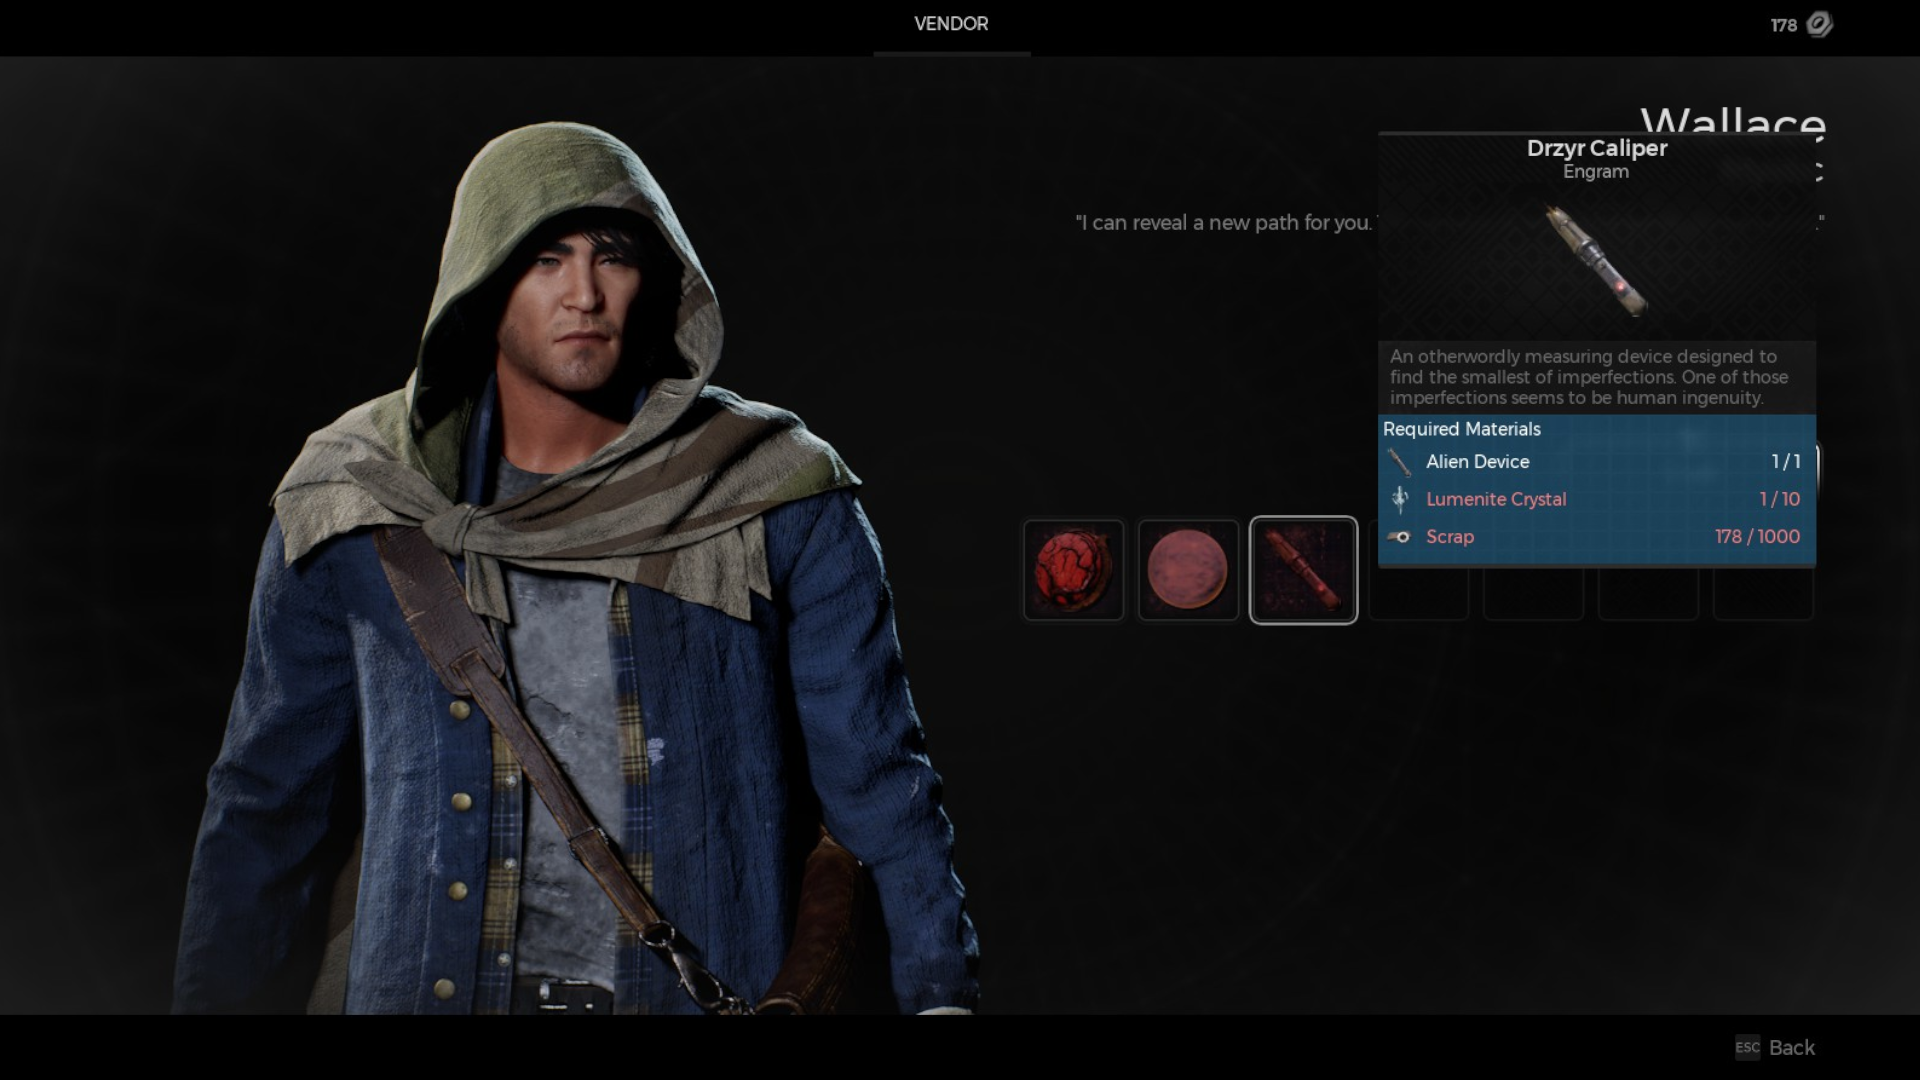 An image of Wallace from Remnant 2 selling the engram which unlocks the Engineer archetype.